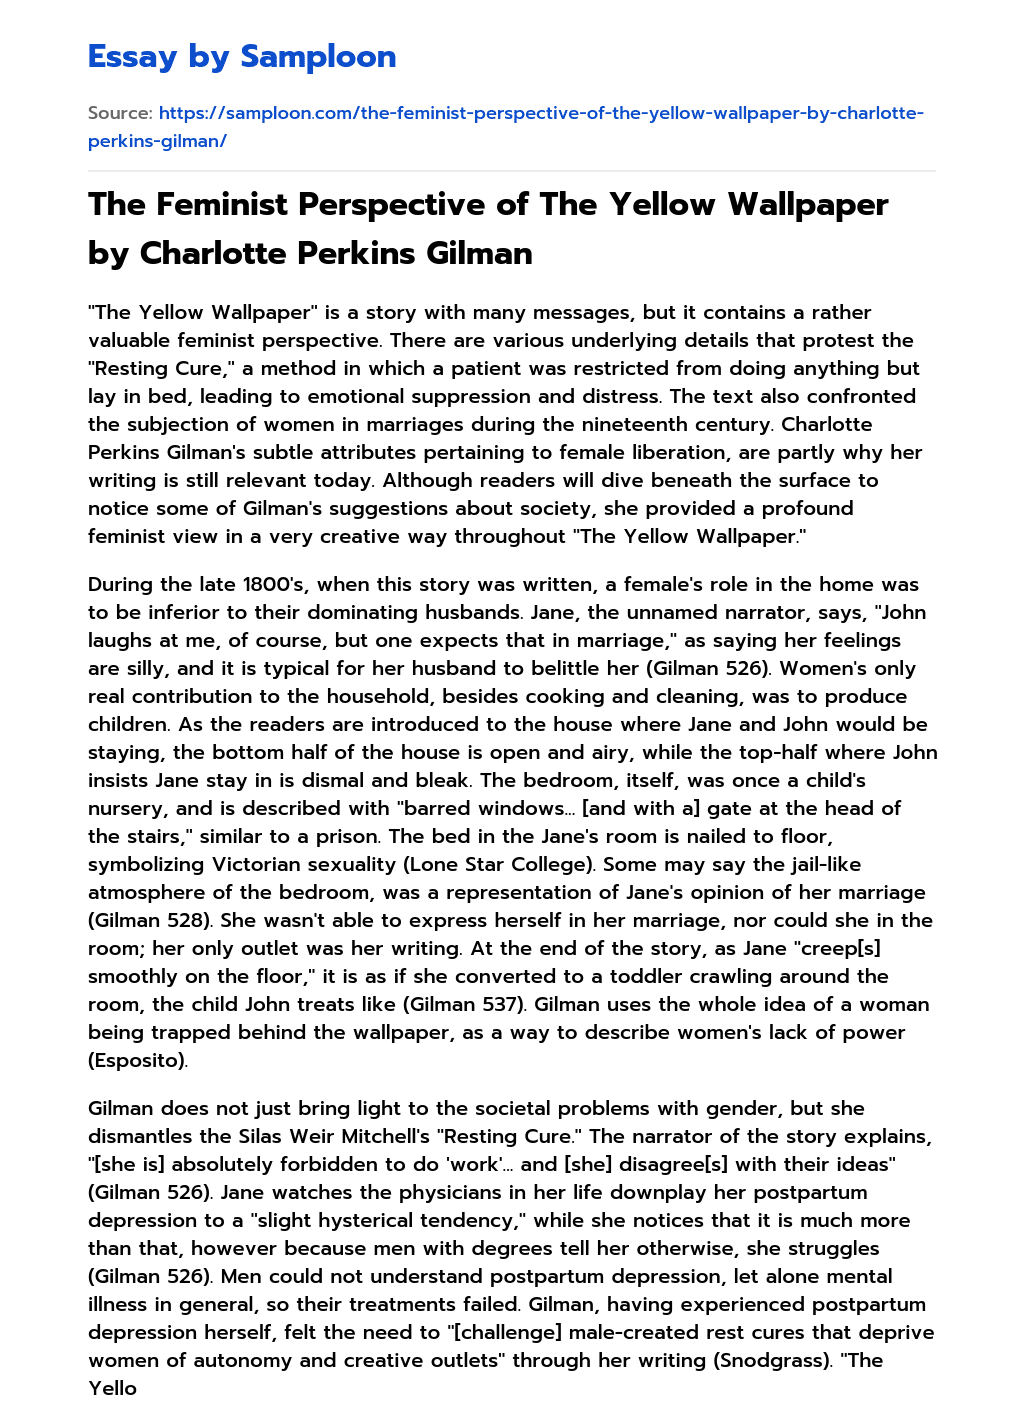 The Feminist Perspective of The Yellow Wallpaper by Charlotte Perkins Gilman essay